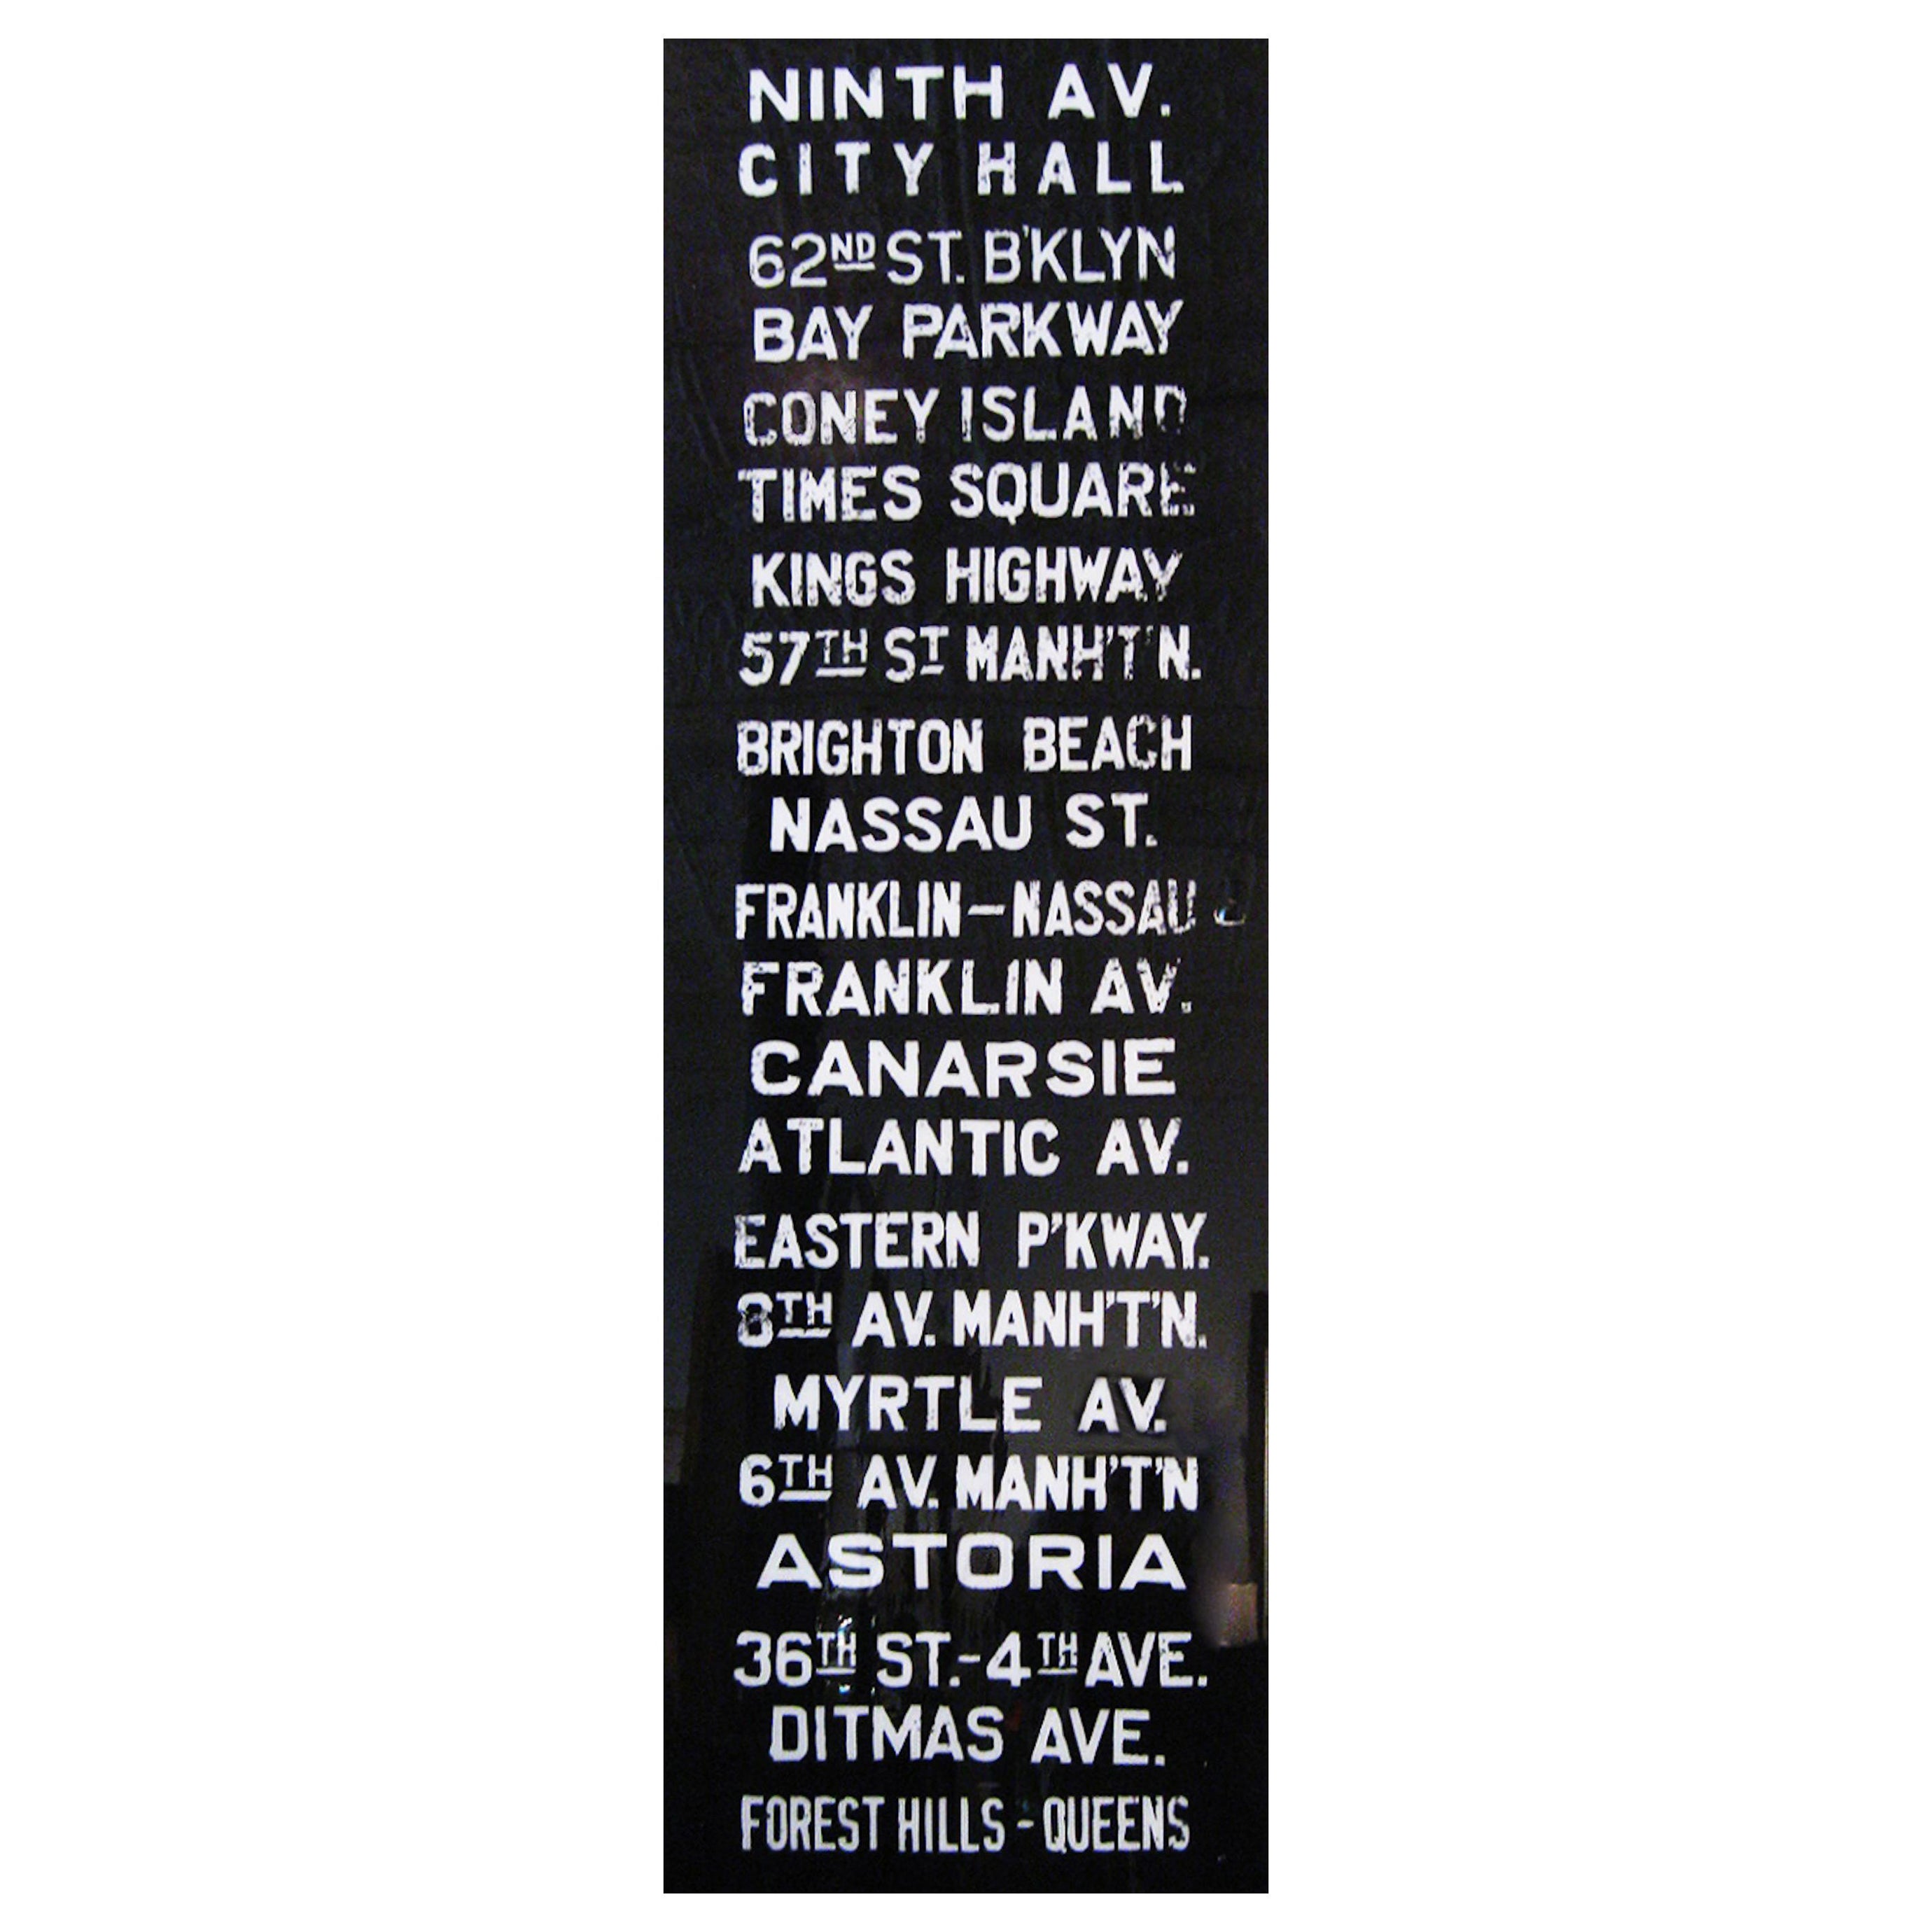 New York Subway Sign, Ninth Ave, mix media and resin, custom For Sale